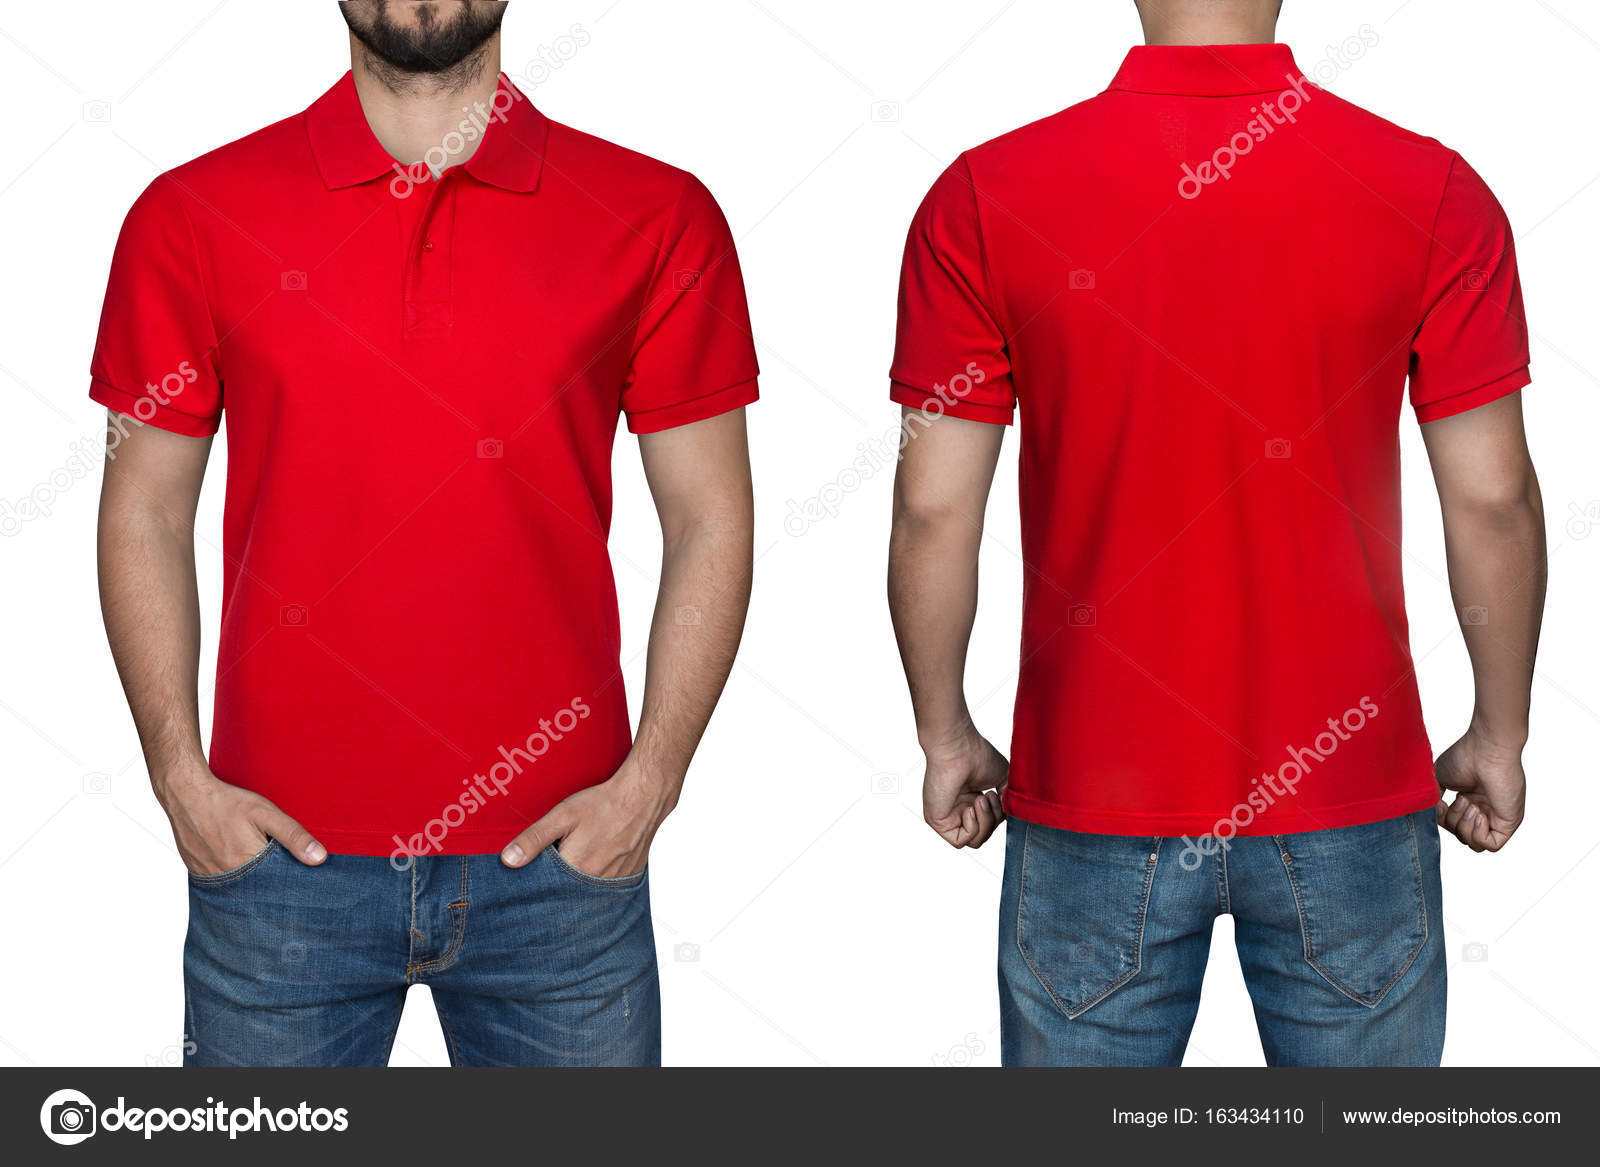 691+ Template Plain Red T Shirt Front And Back Best Quality Mockups PSD